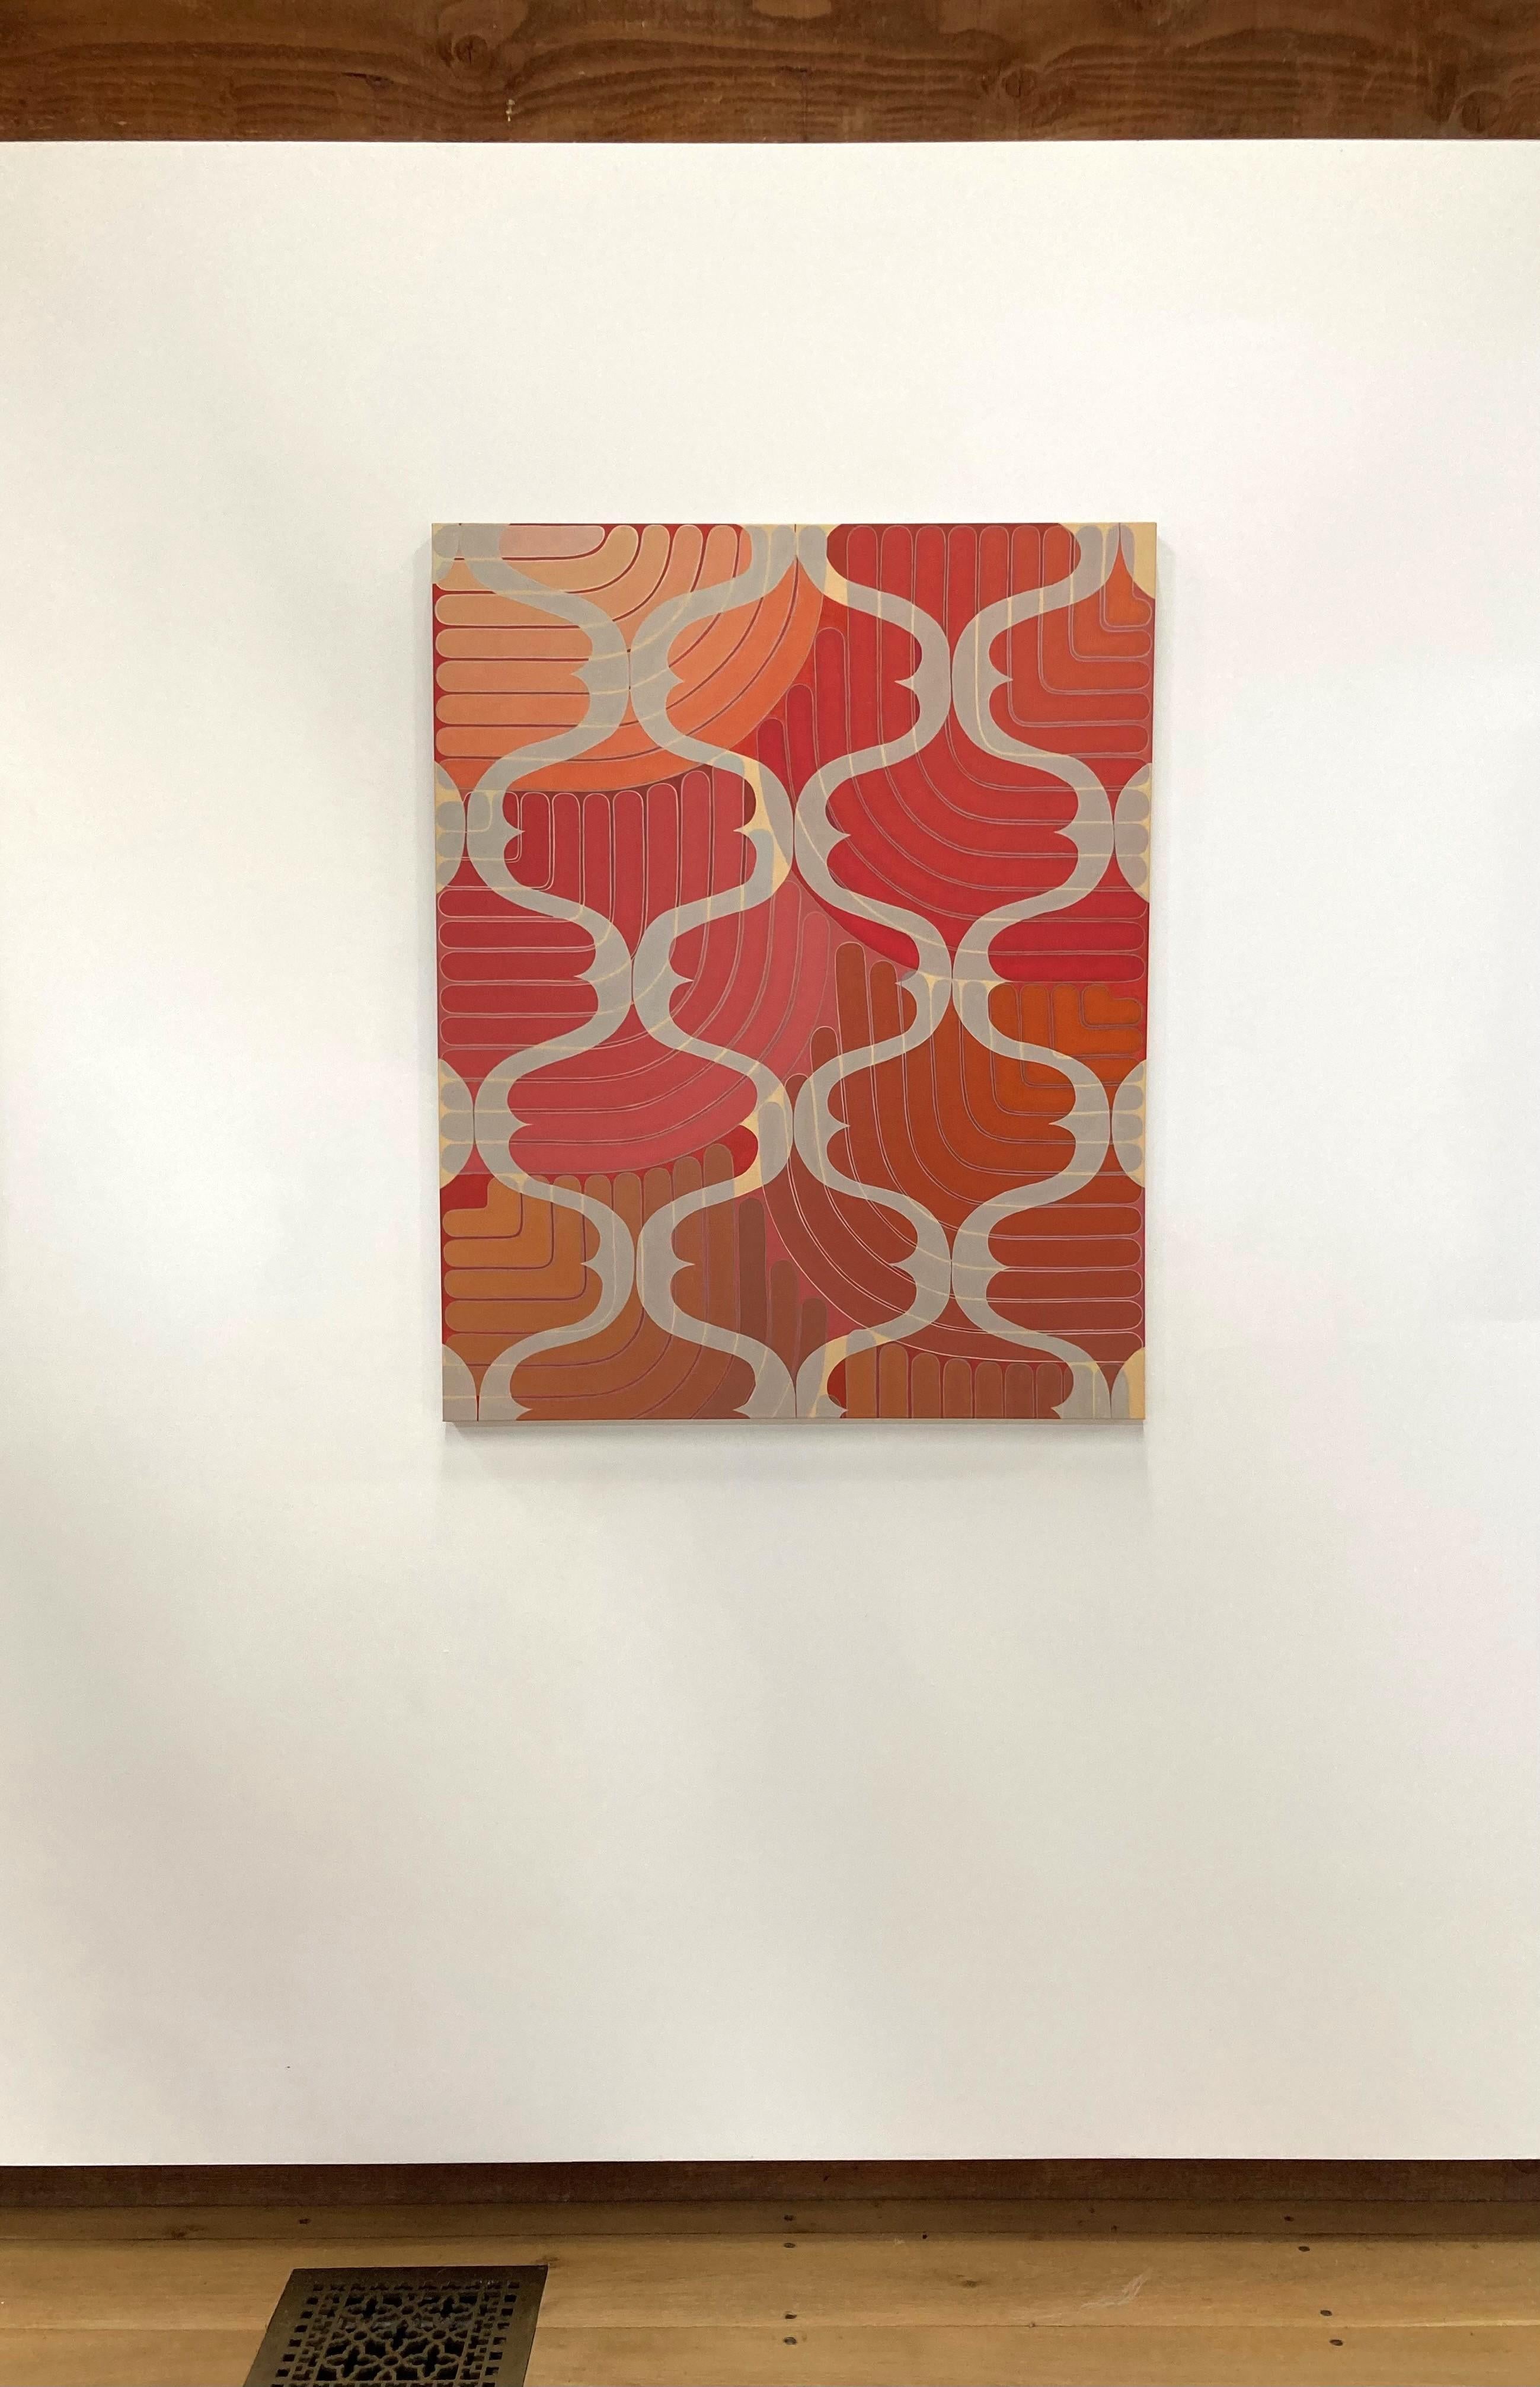 Drape, Coral, Dark Pink, Gray, Orange Geometric Abstract Curving Lines Pattern - Painting by Jenny Kemp